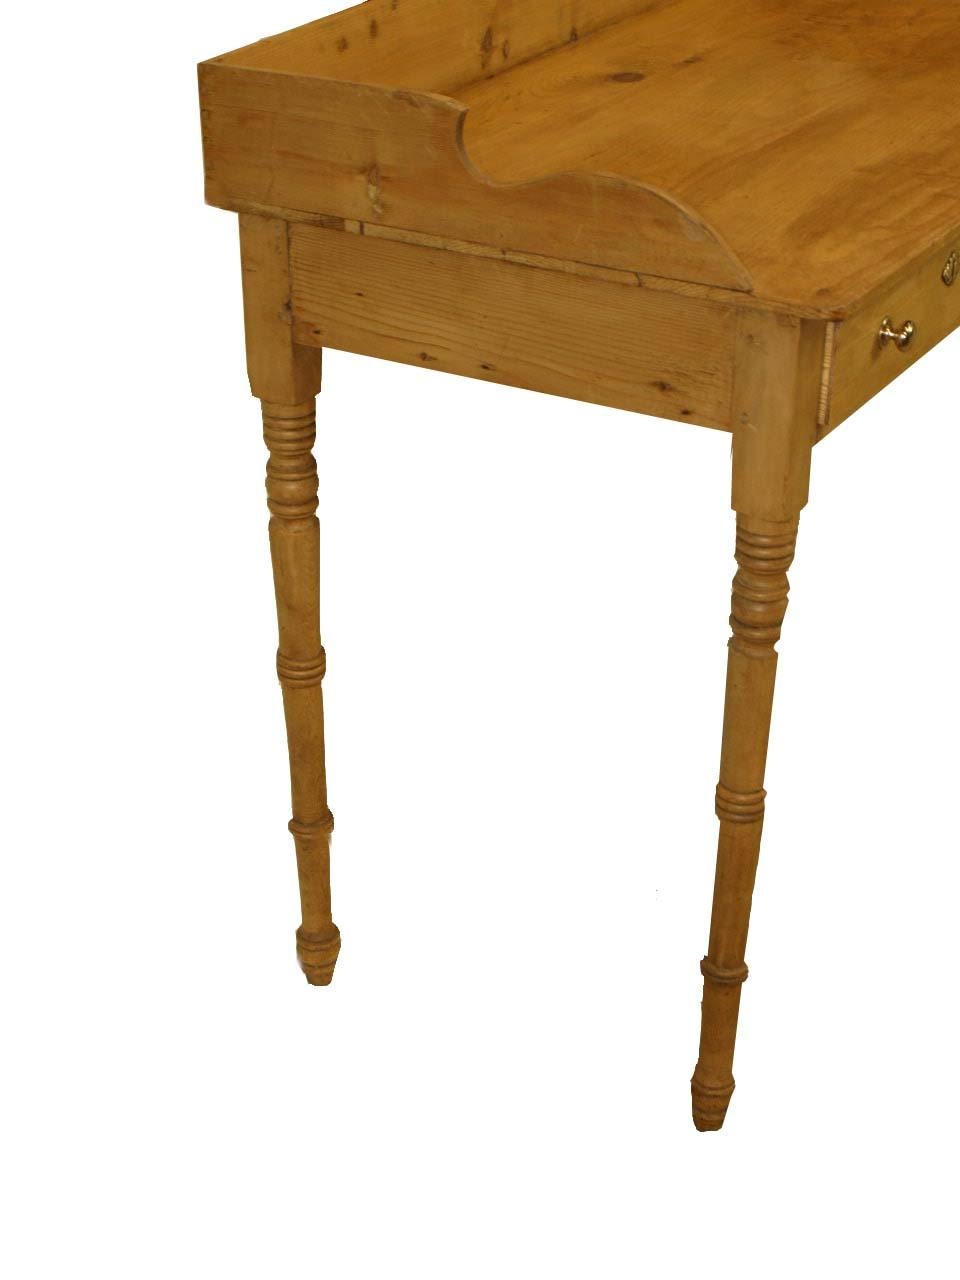 English pine serving table with gallery surrounding the top, two drawers with brass ball knobs, delicately turned legs, the top has a slight indention ( see photo of left hand side) , beautiful color and patina. The overall height to the back of the